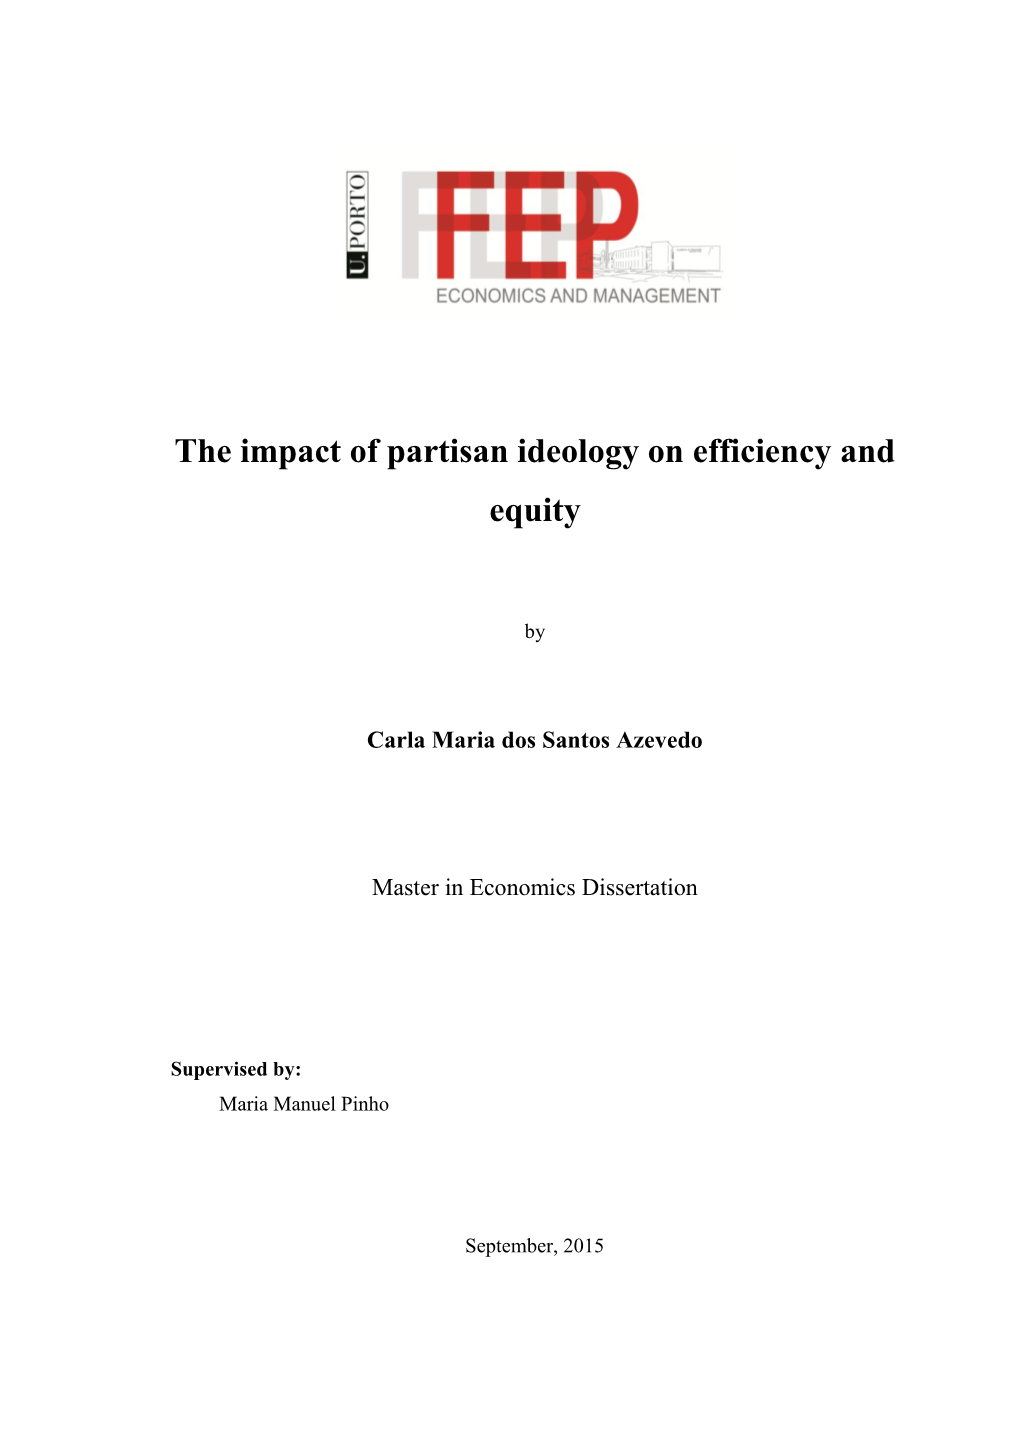 The Impact of Partisan Ideology on Efficiency and Equity